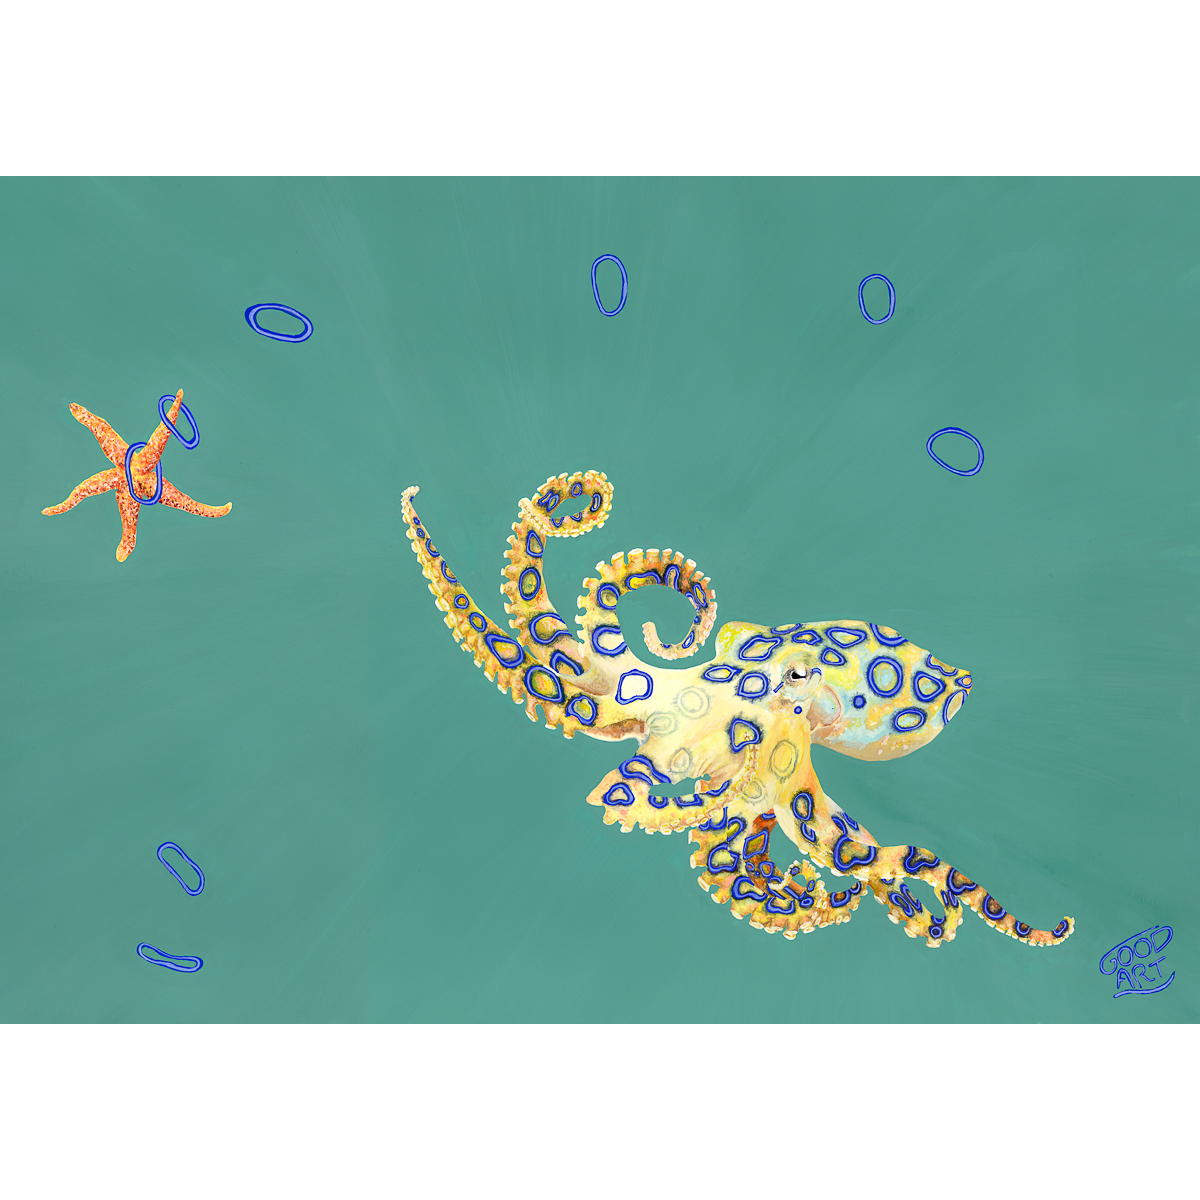 A painting of a blue ringed octopus playing quoits with a starfish. The blue ringed octopus found off the coast of Western Australia. Painted with a predominately teal background. Art print for boys teens bedroom. An artwork for marine life enthusiast.